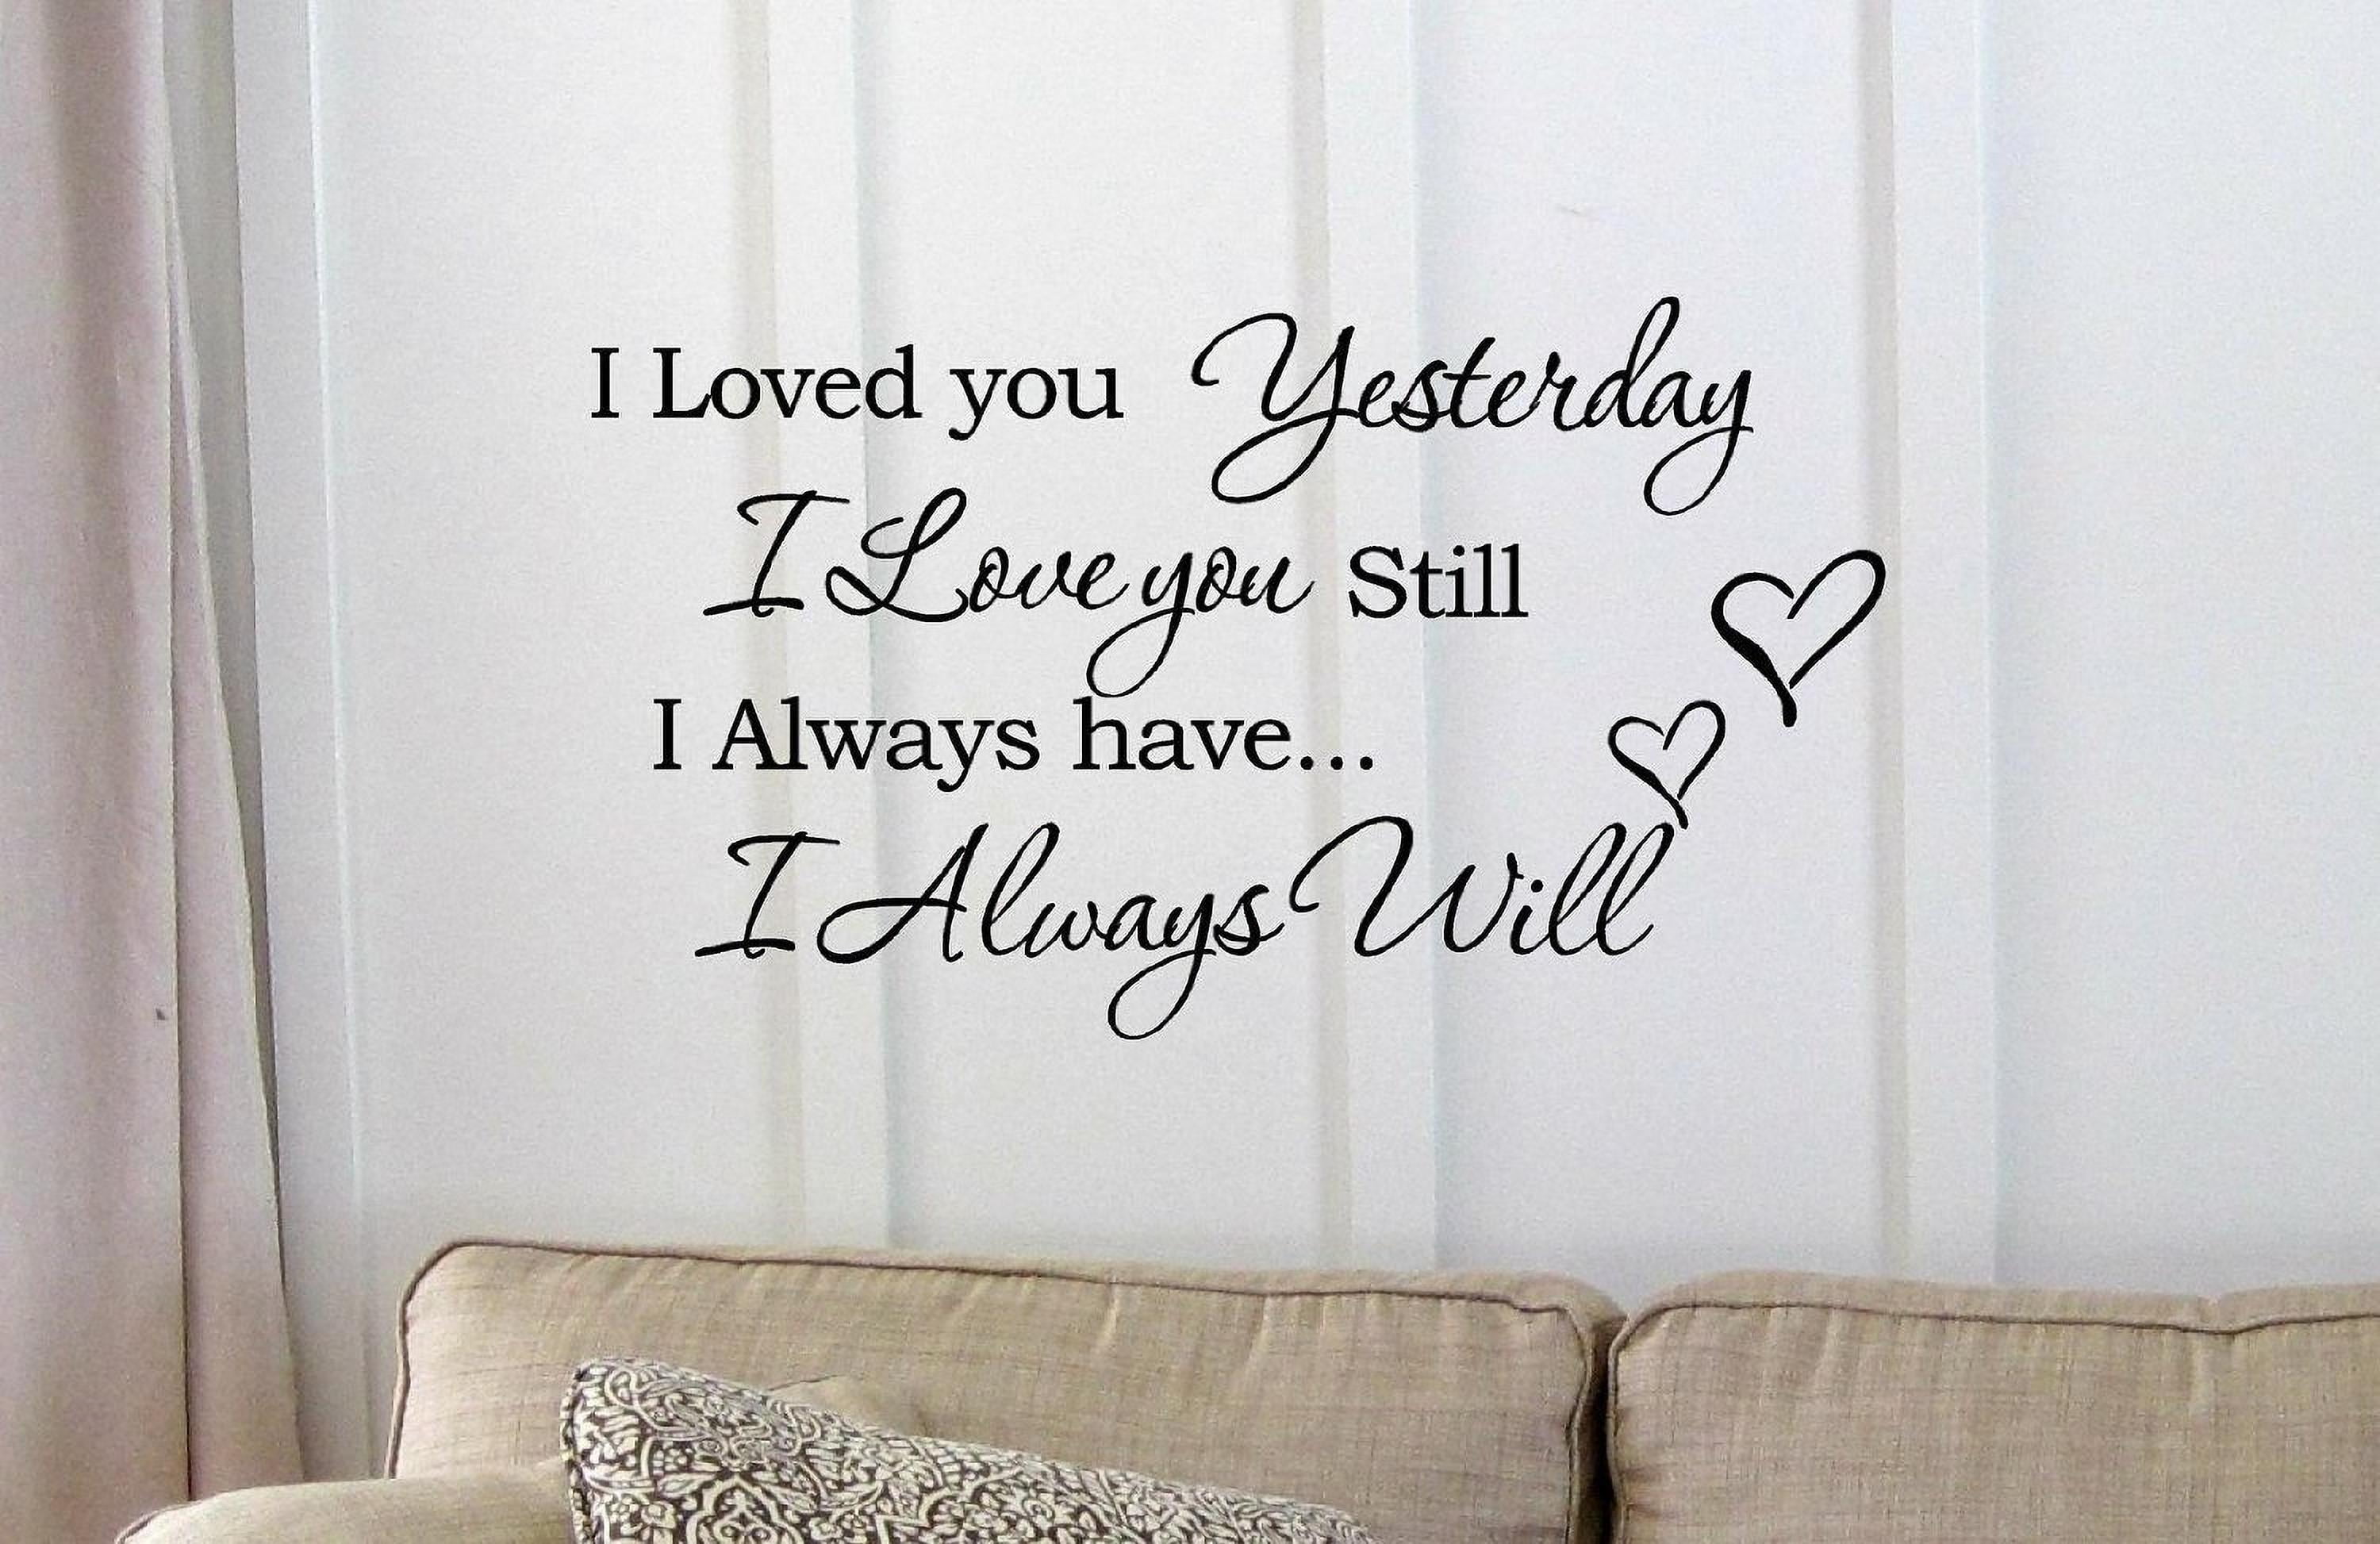 I Loved you yesterday I Love you still" Vinyl Wall Art Sticker Quote UK RUI138 